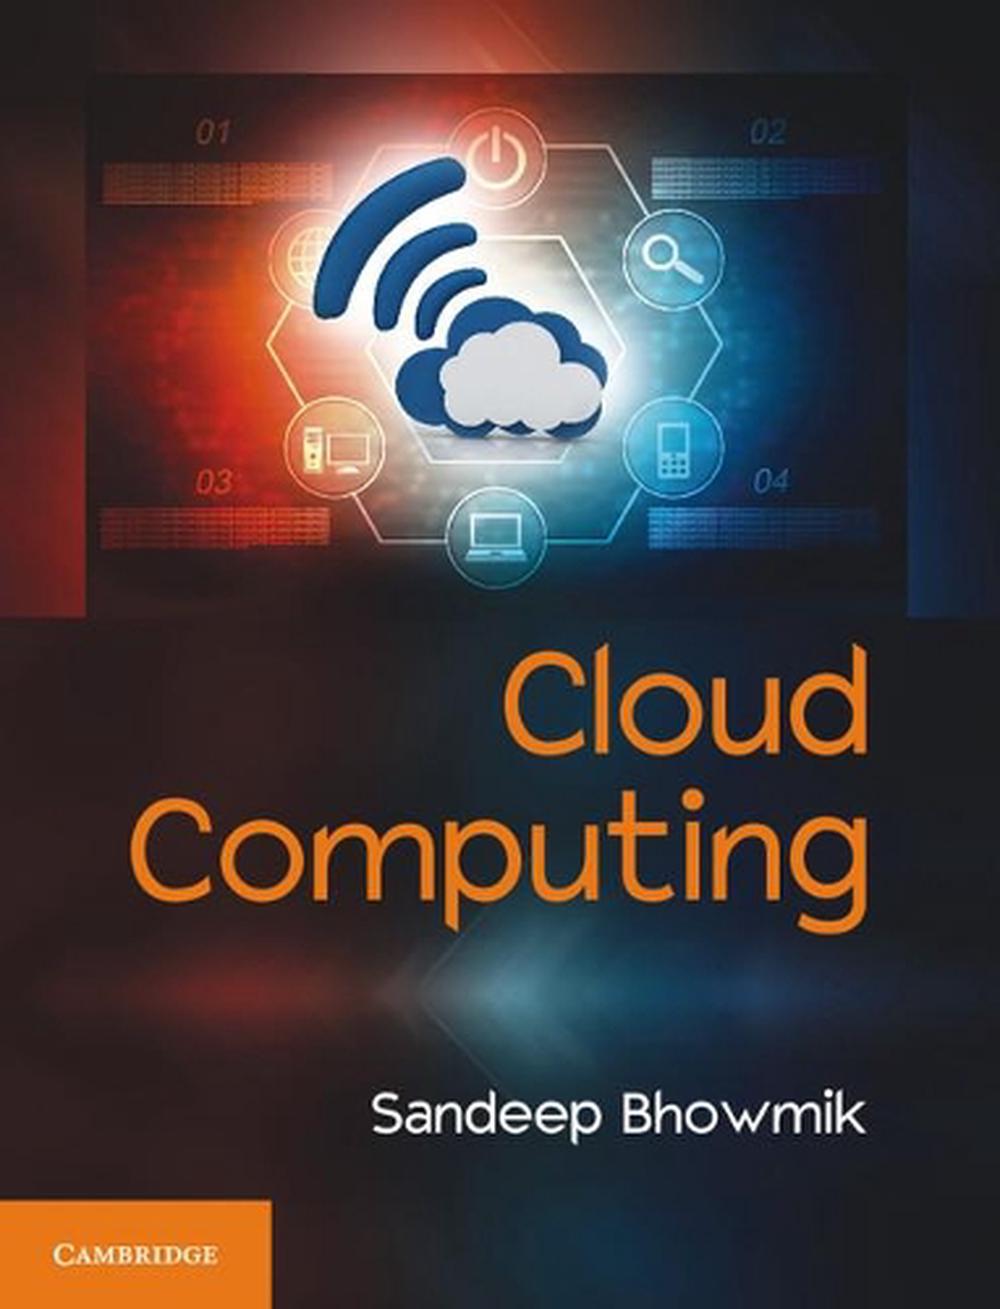 58 Top Best Writers Aws Cloud Computing Books with Best Writers